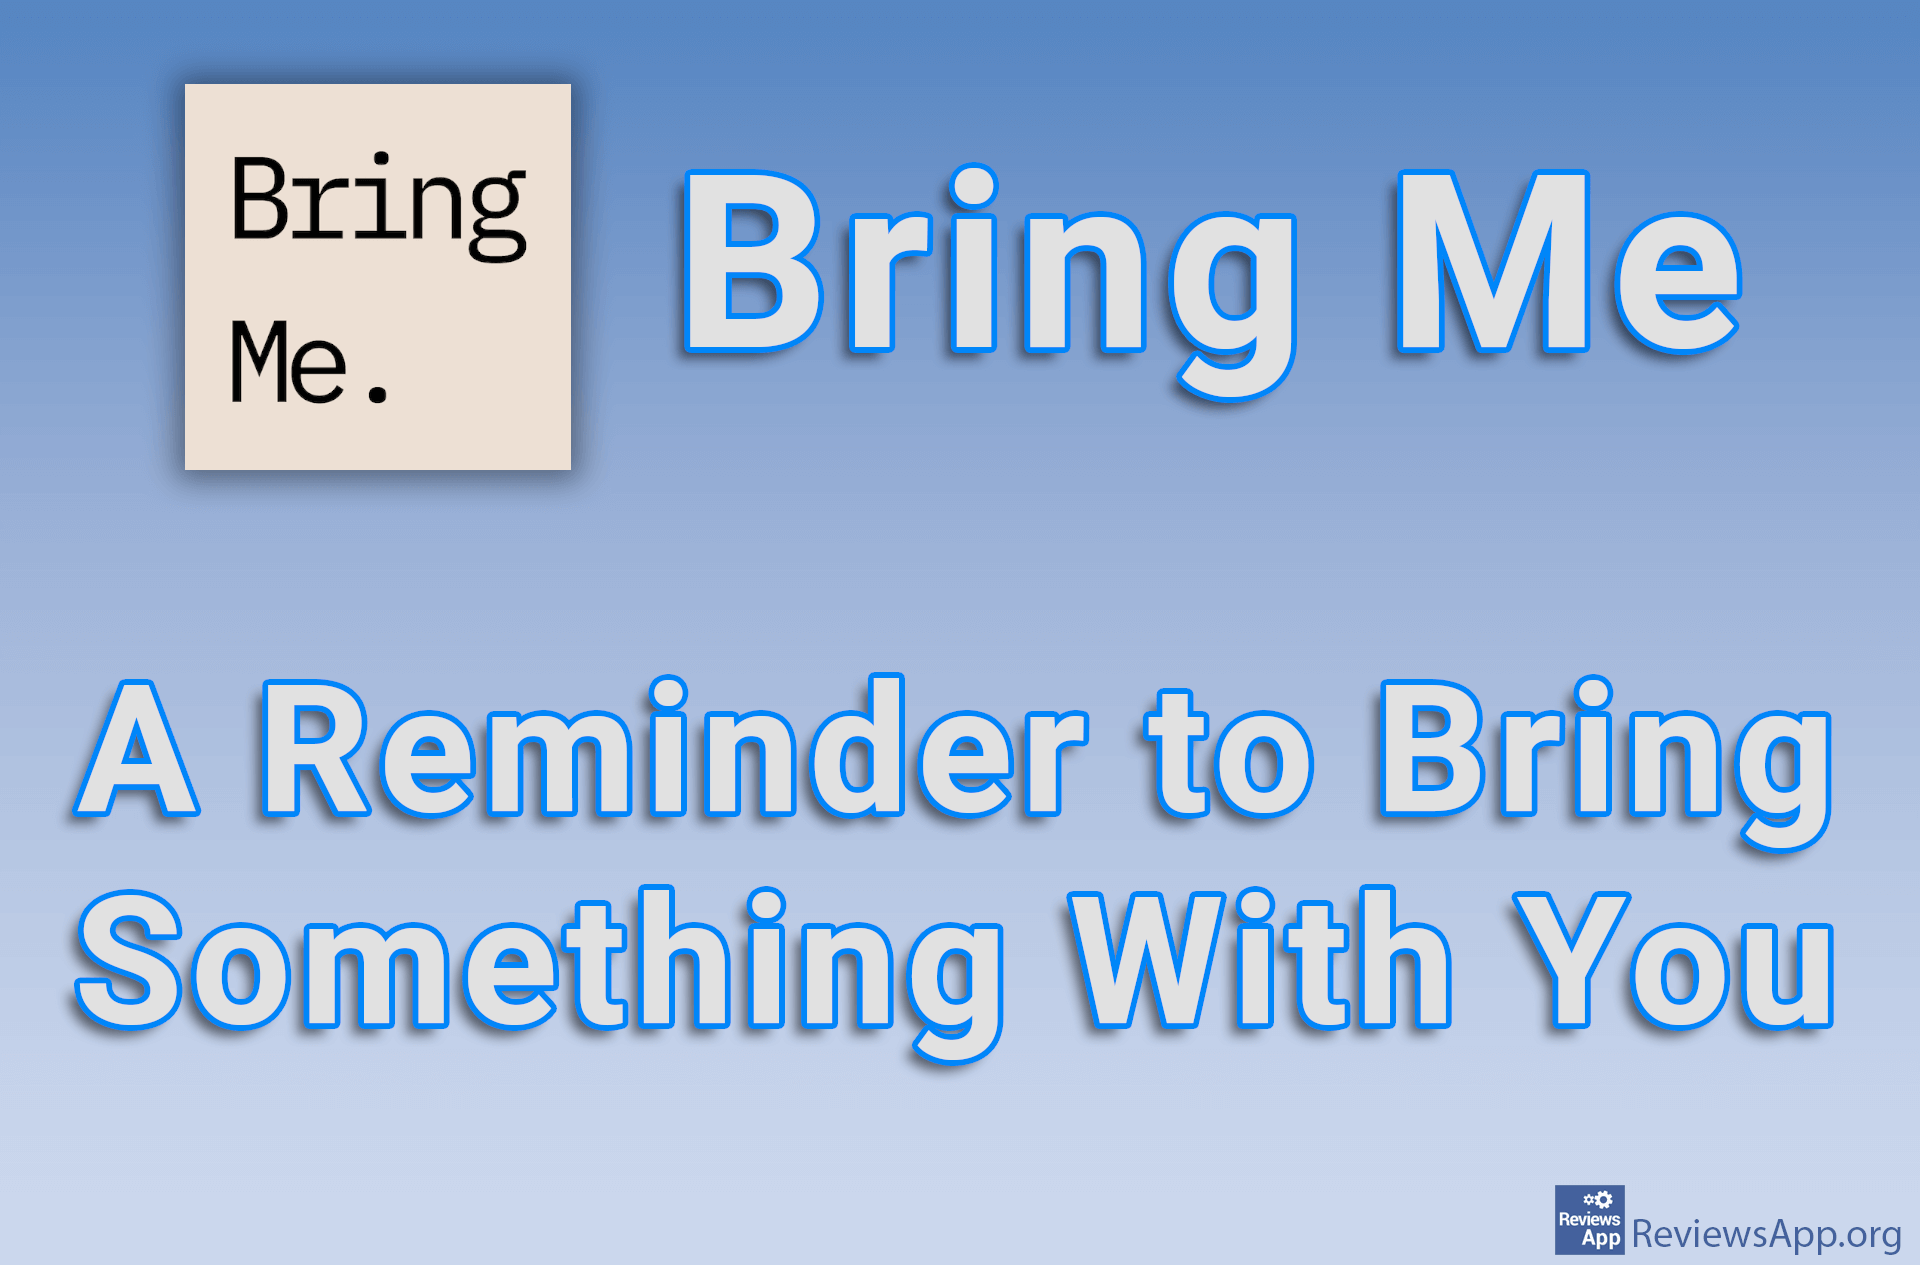 Bring Me – A Reminder to Bring Something With You